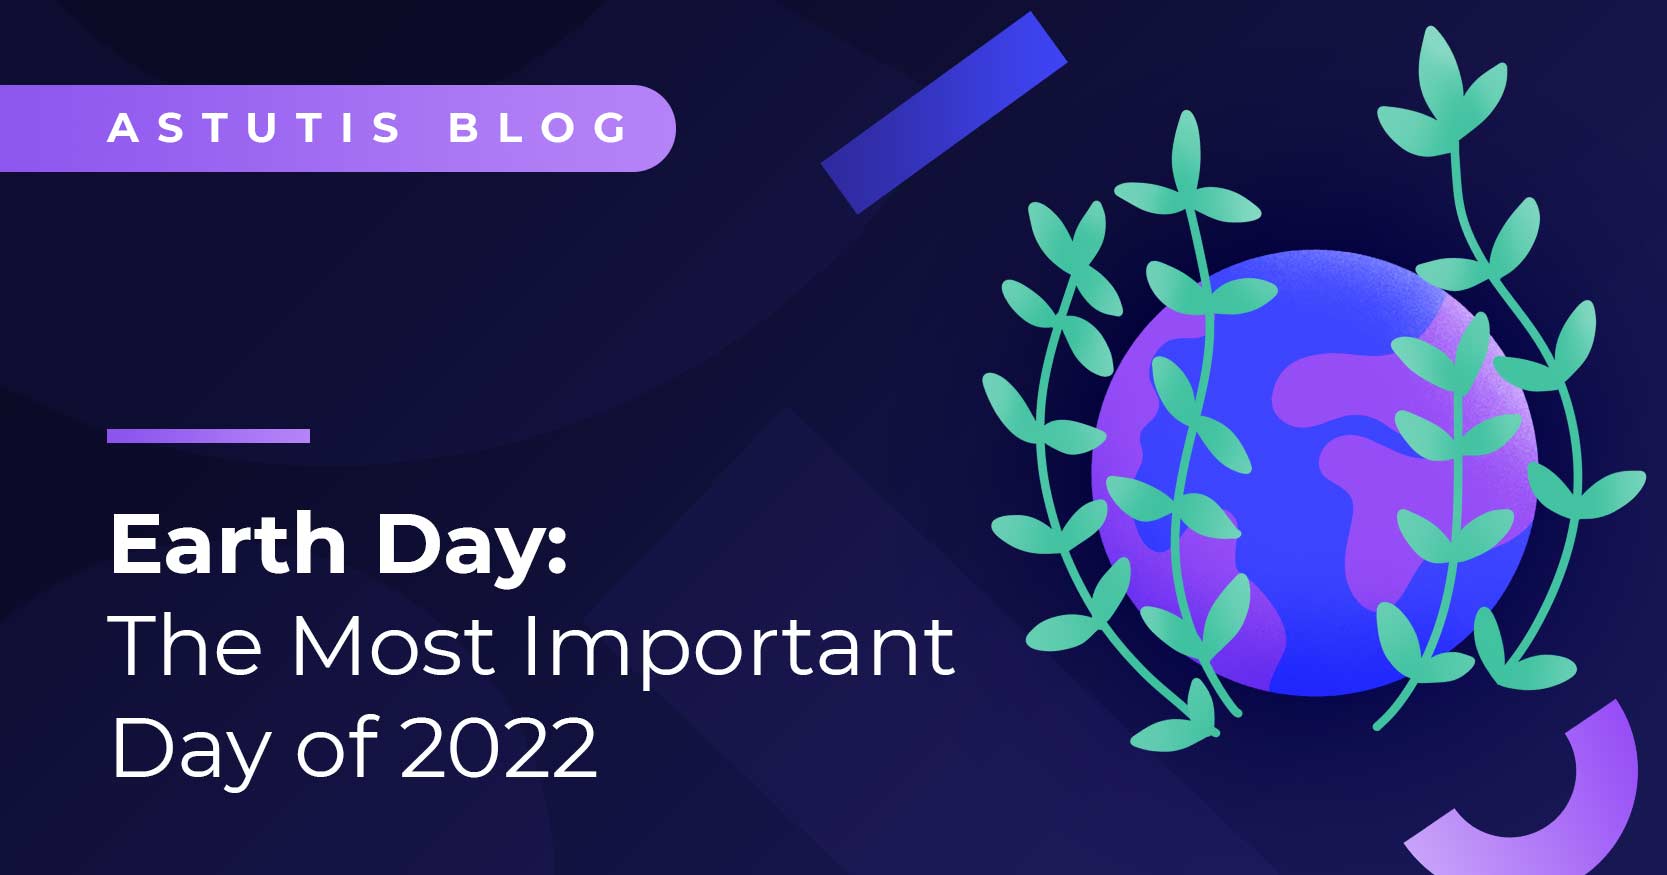 Earth Day: The Most Important Day of 2022 Image